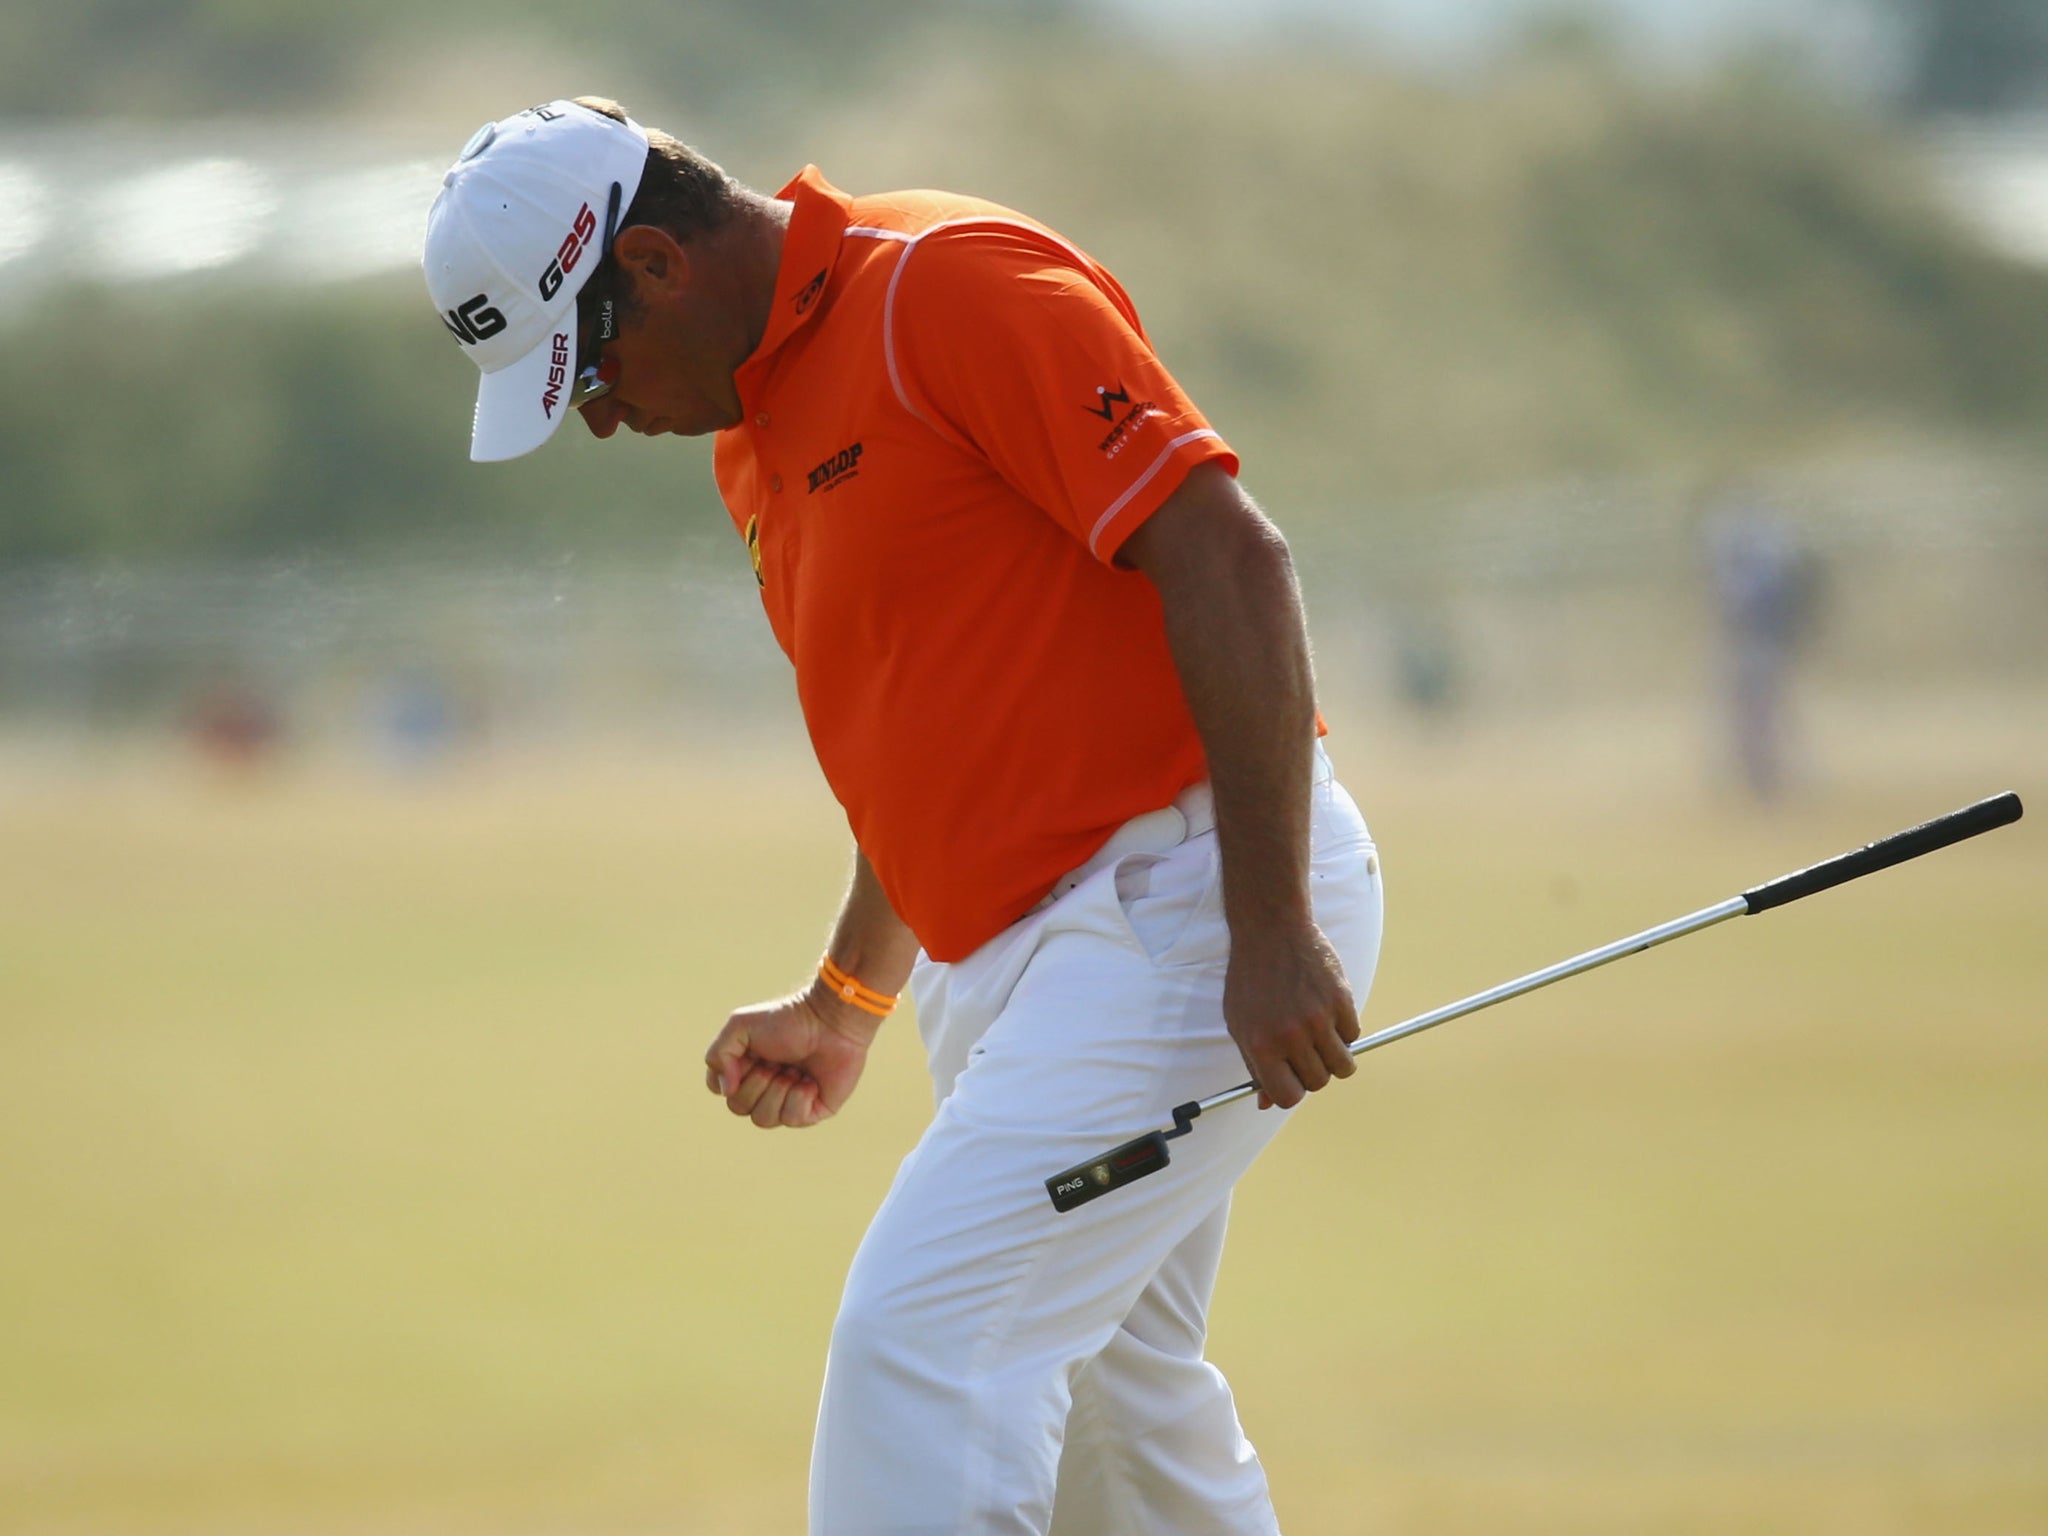 Lee Westwood celebrates his eagle at the fifth on day 3 of the Open Championship